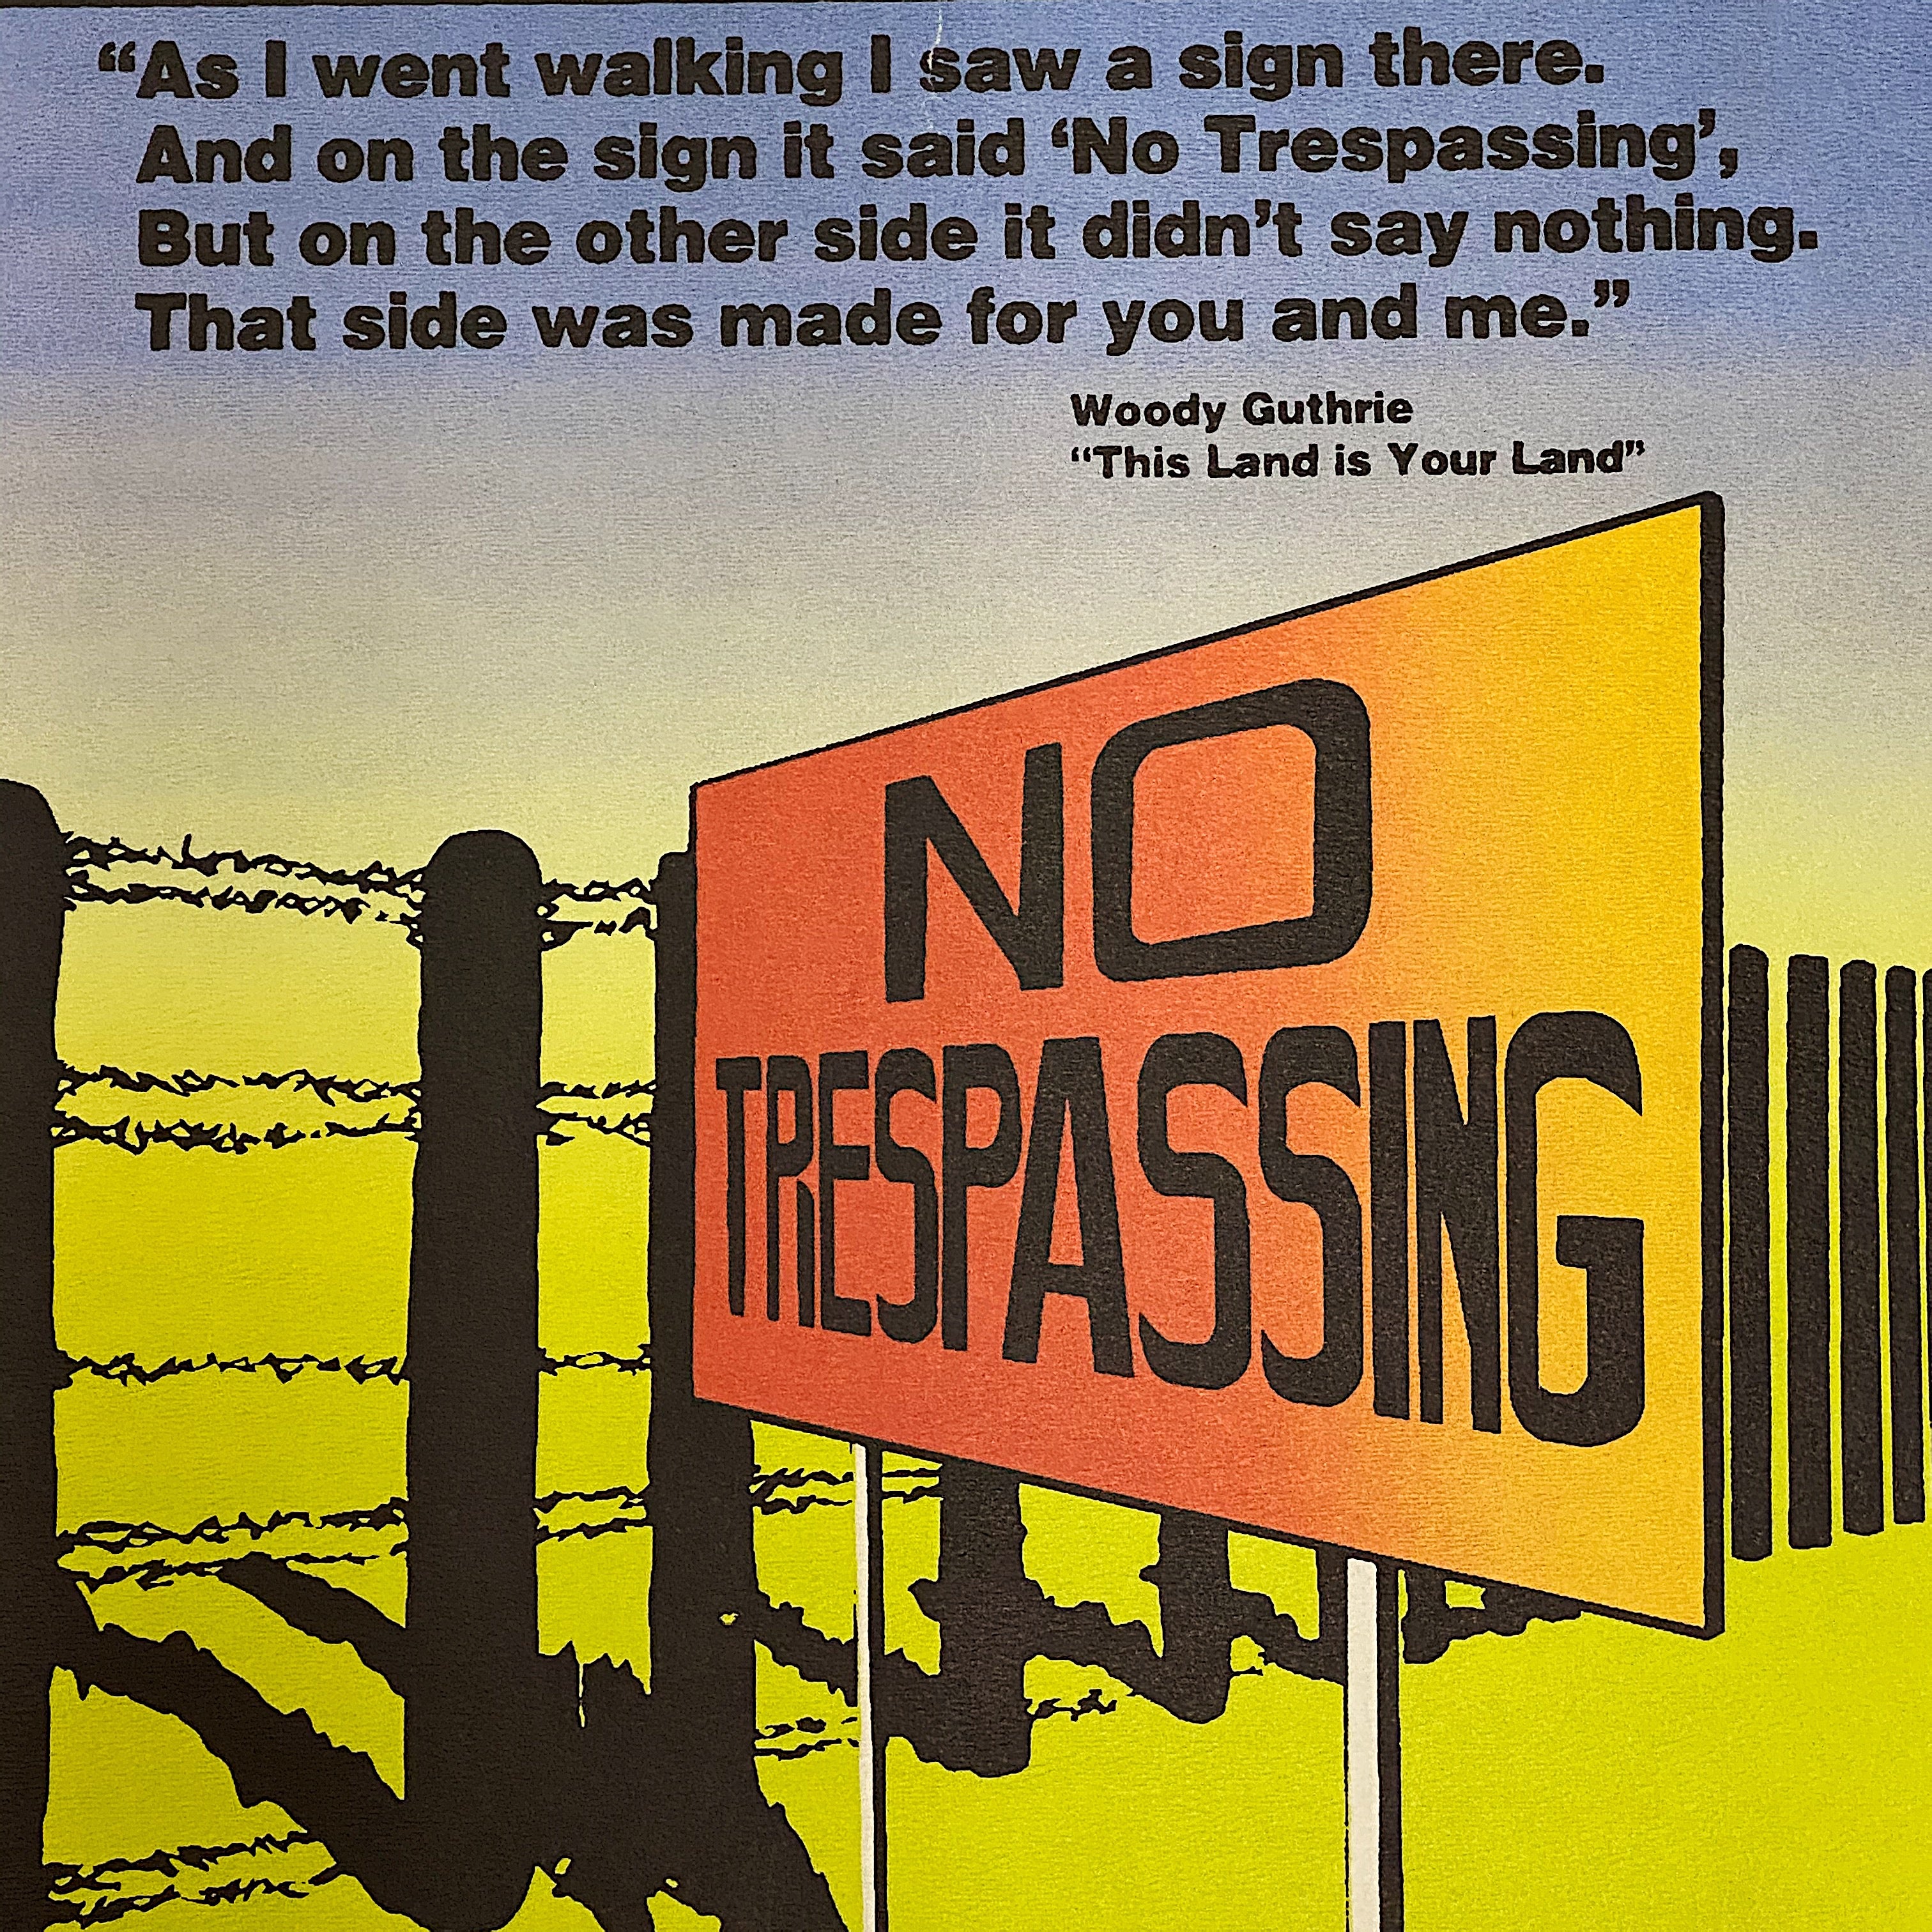 Rare Political Lithograph Poster by Rich Kees - No Trespassing - 1980s Minnesota Artist - Woody Guthrie - Progressive Artwork - Historical